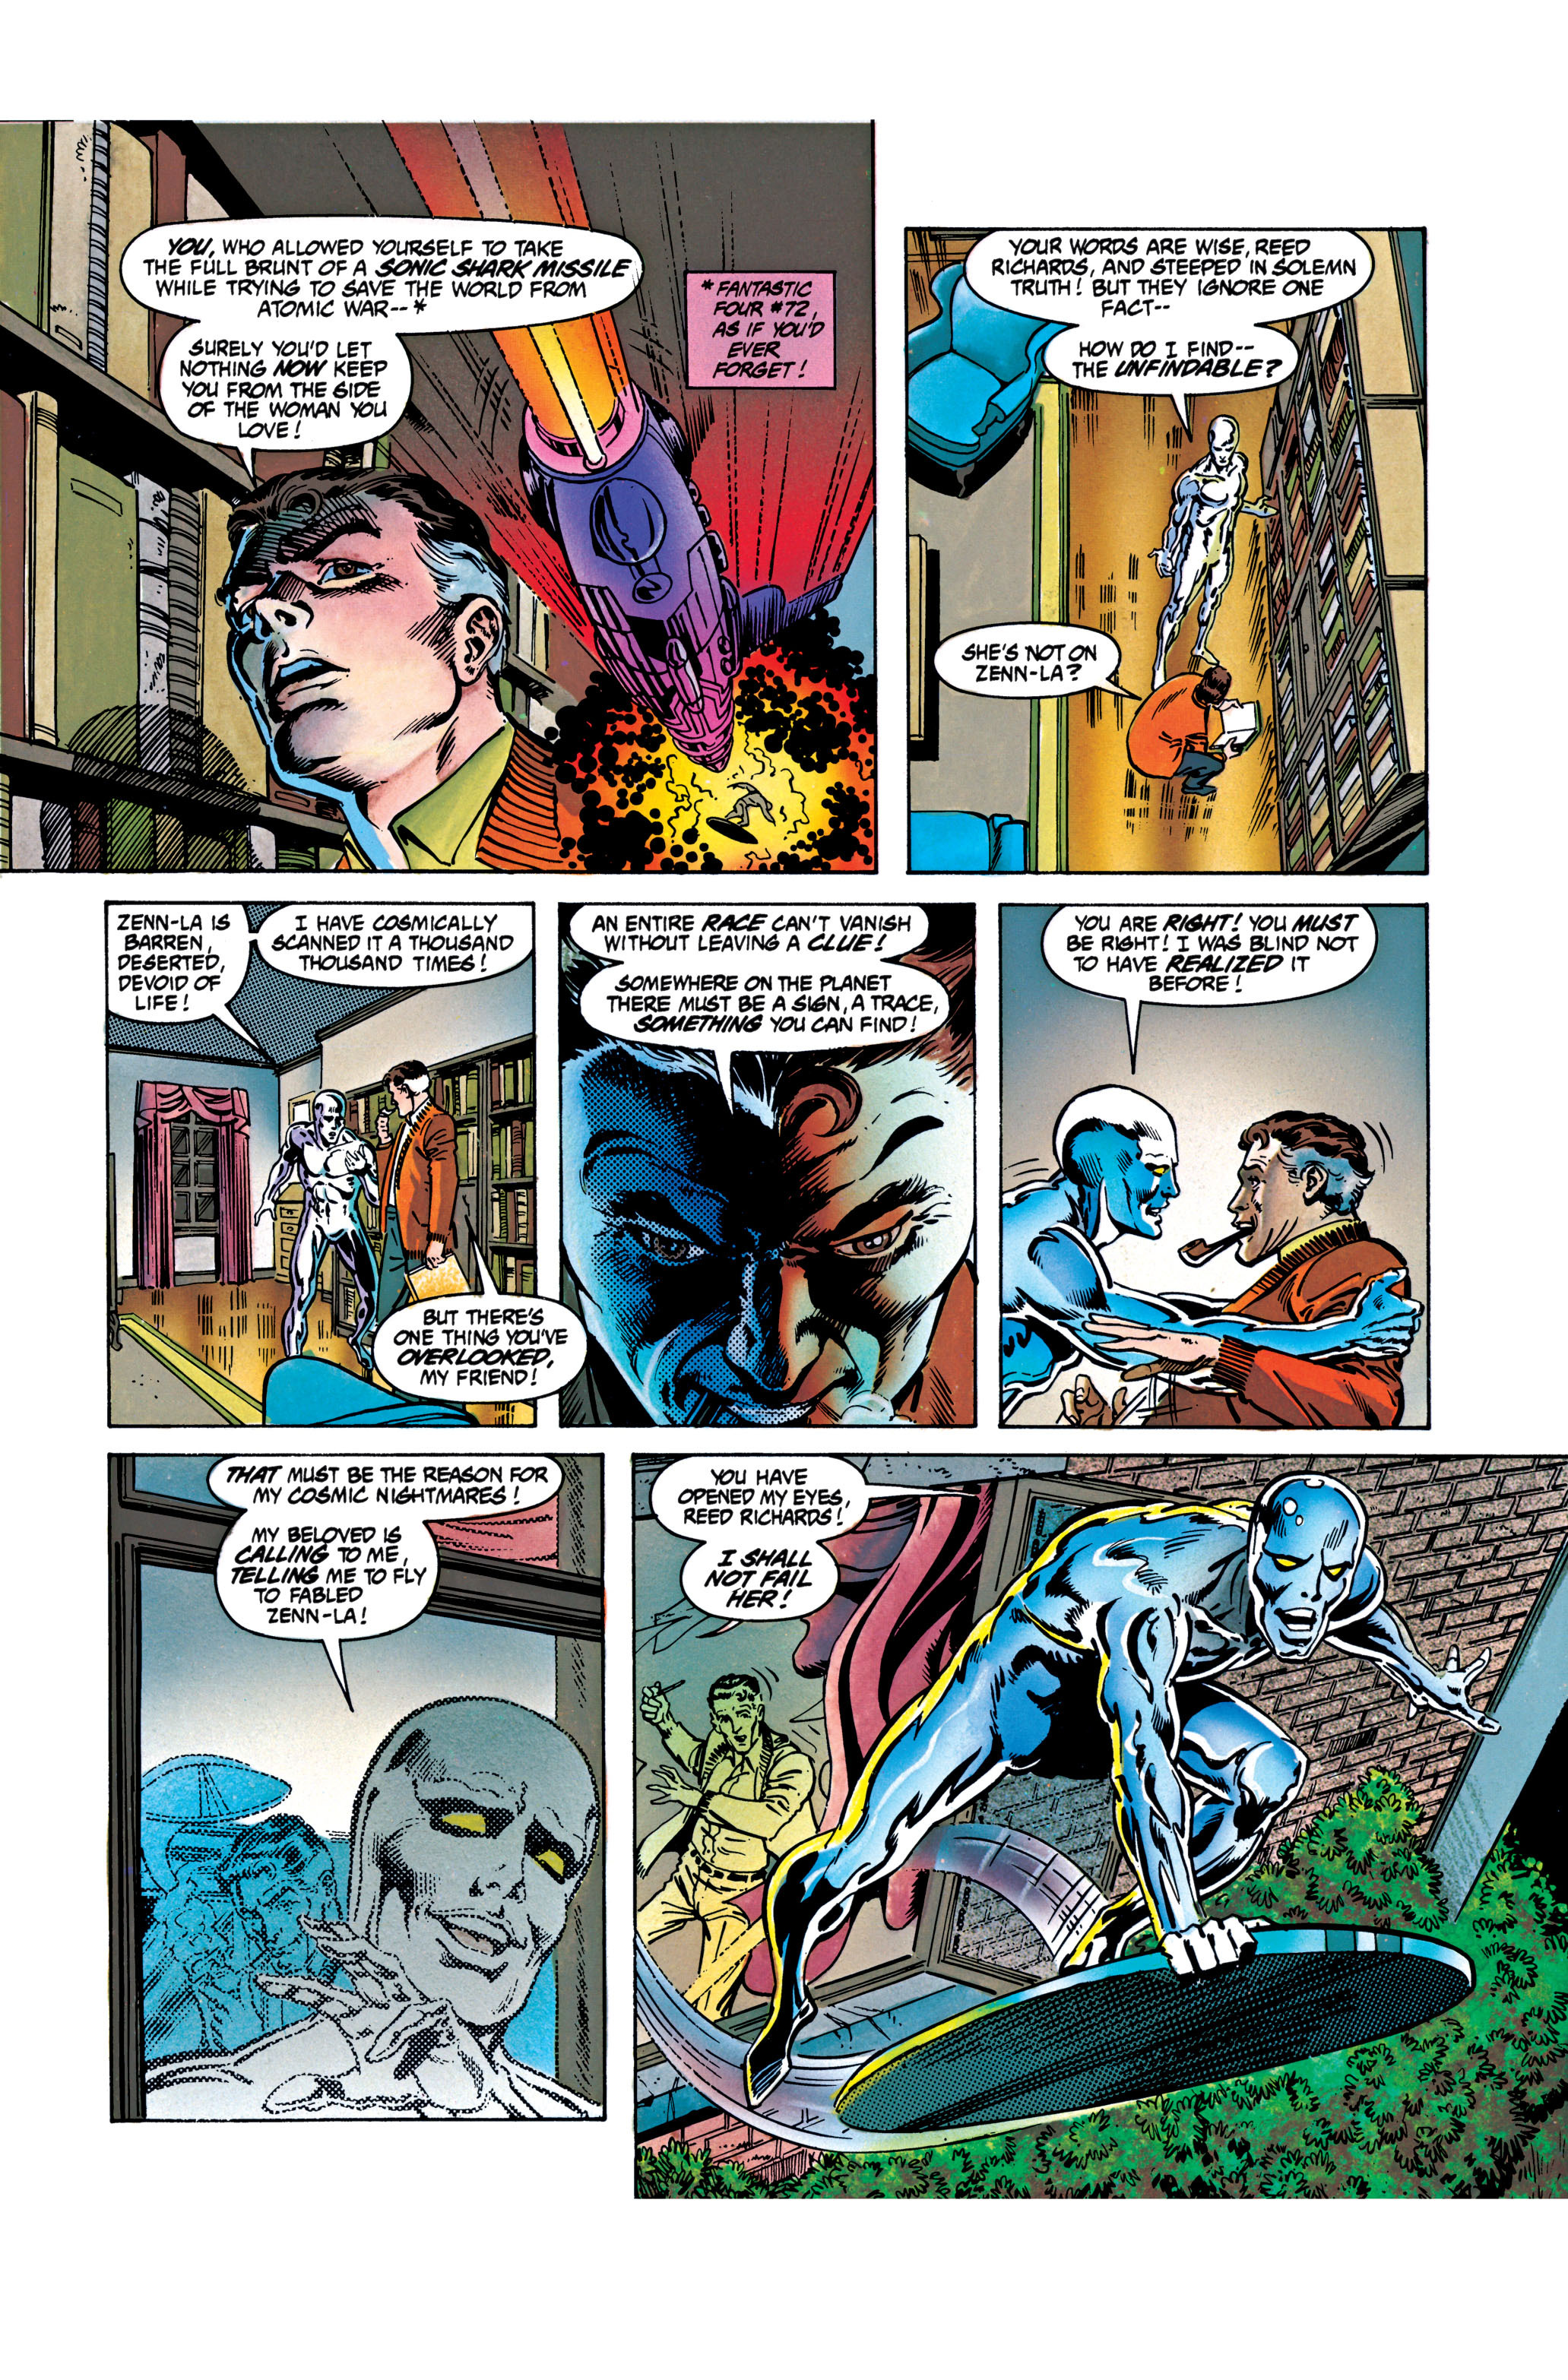 Read online Silver Surfer: Parable comic -  Issue # TPB - 73